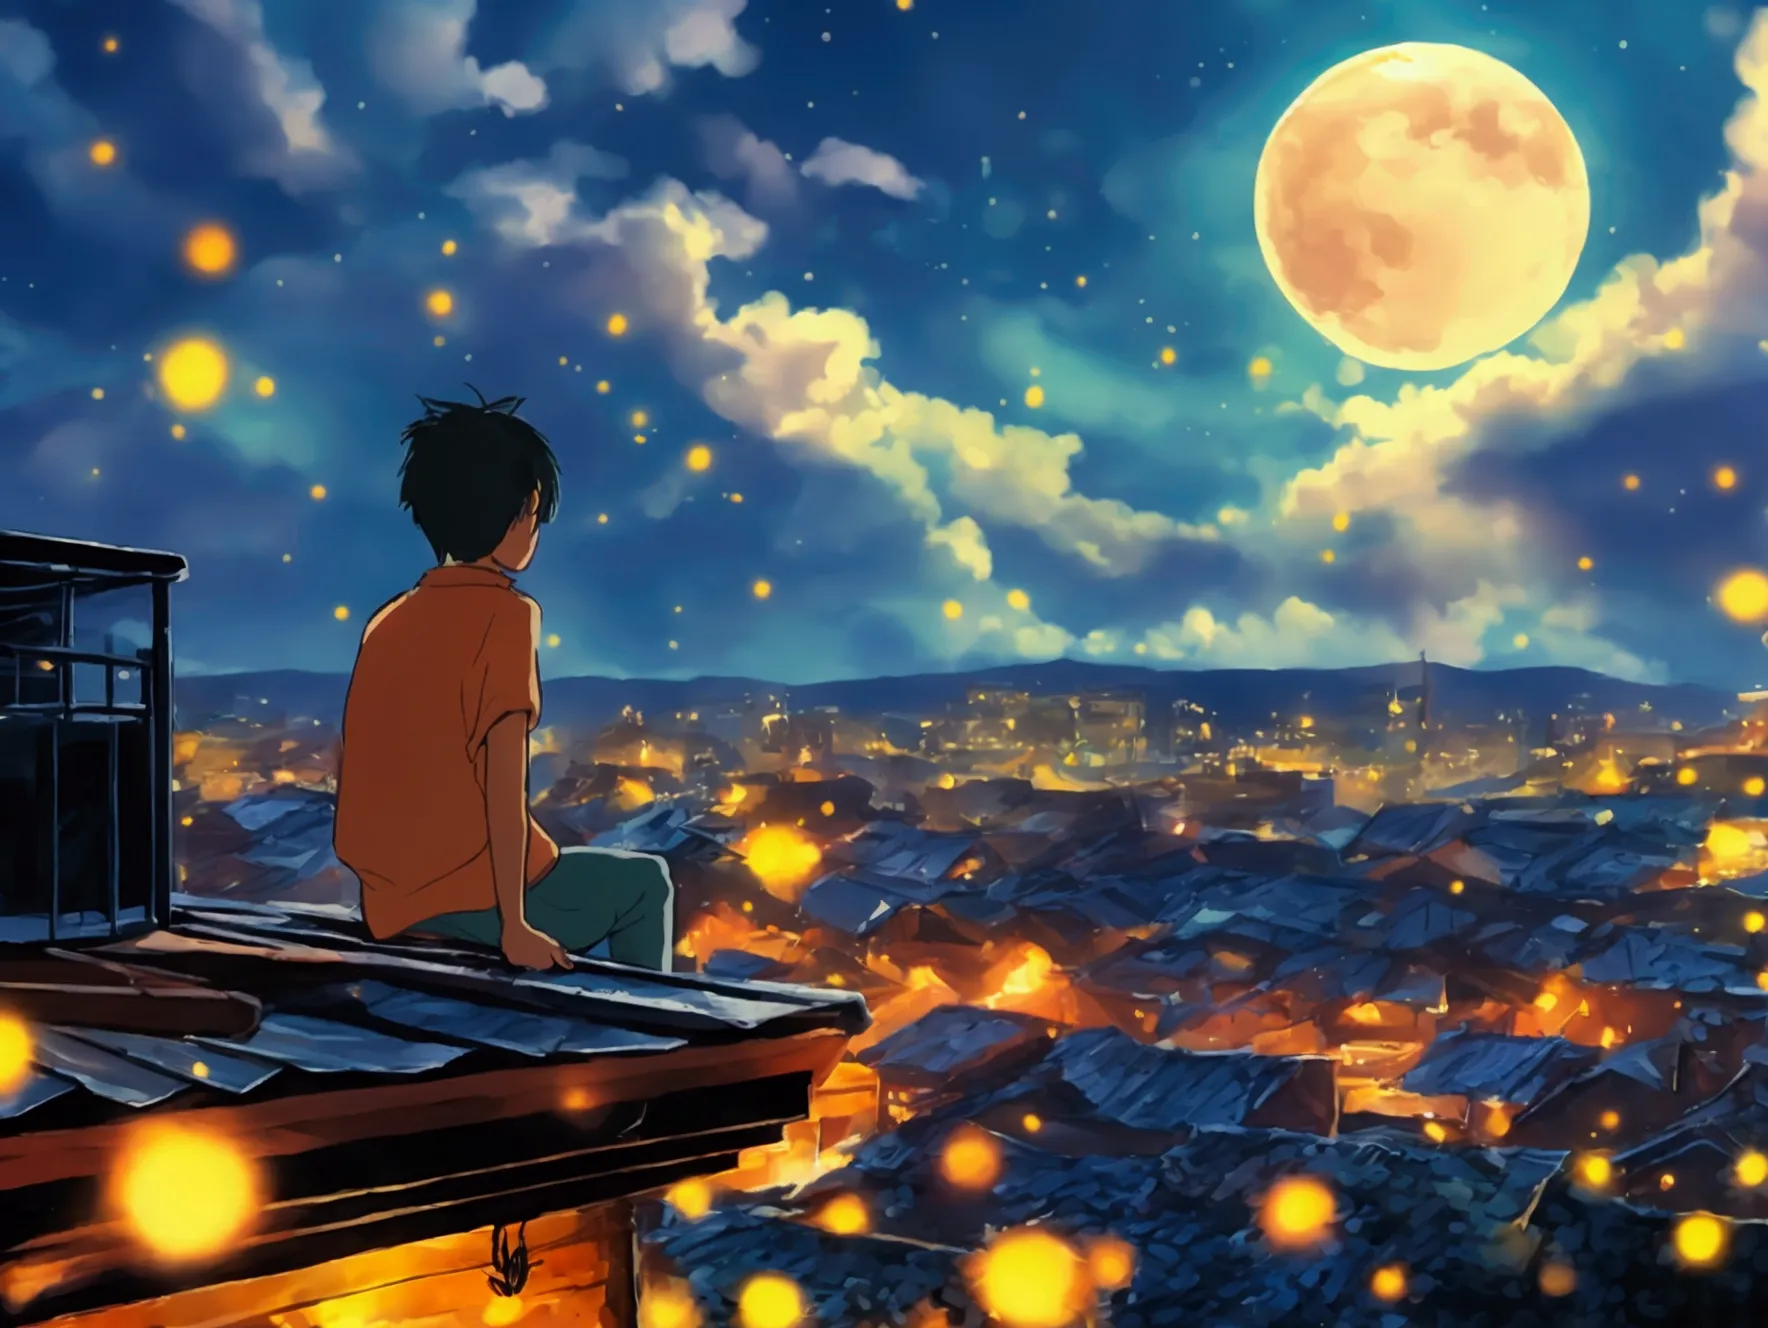 A boy is sitting on a roof on a moonlit night..